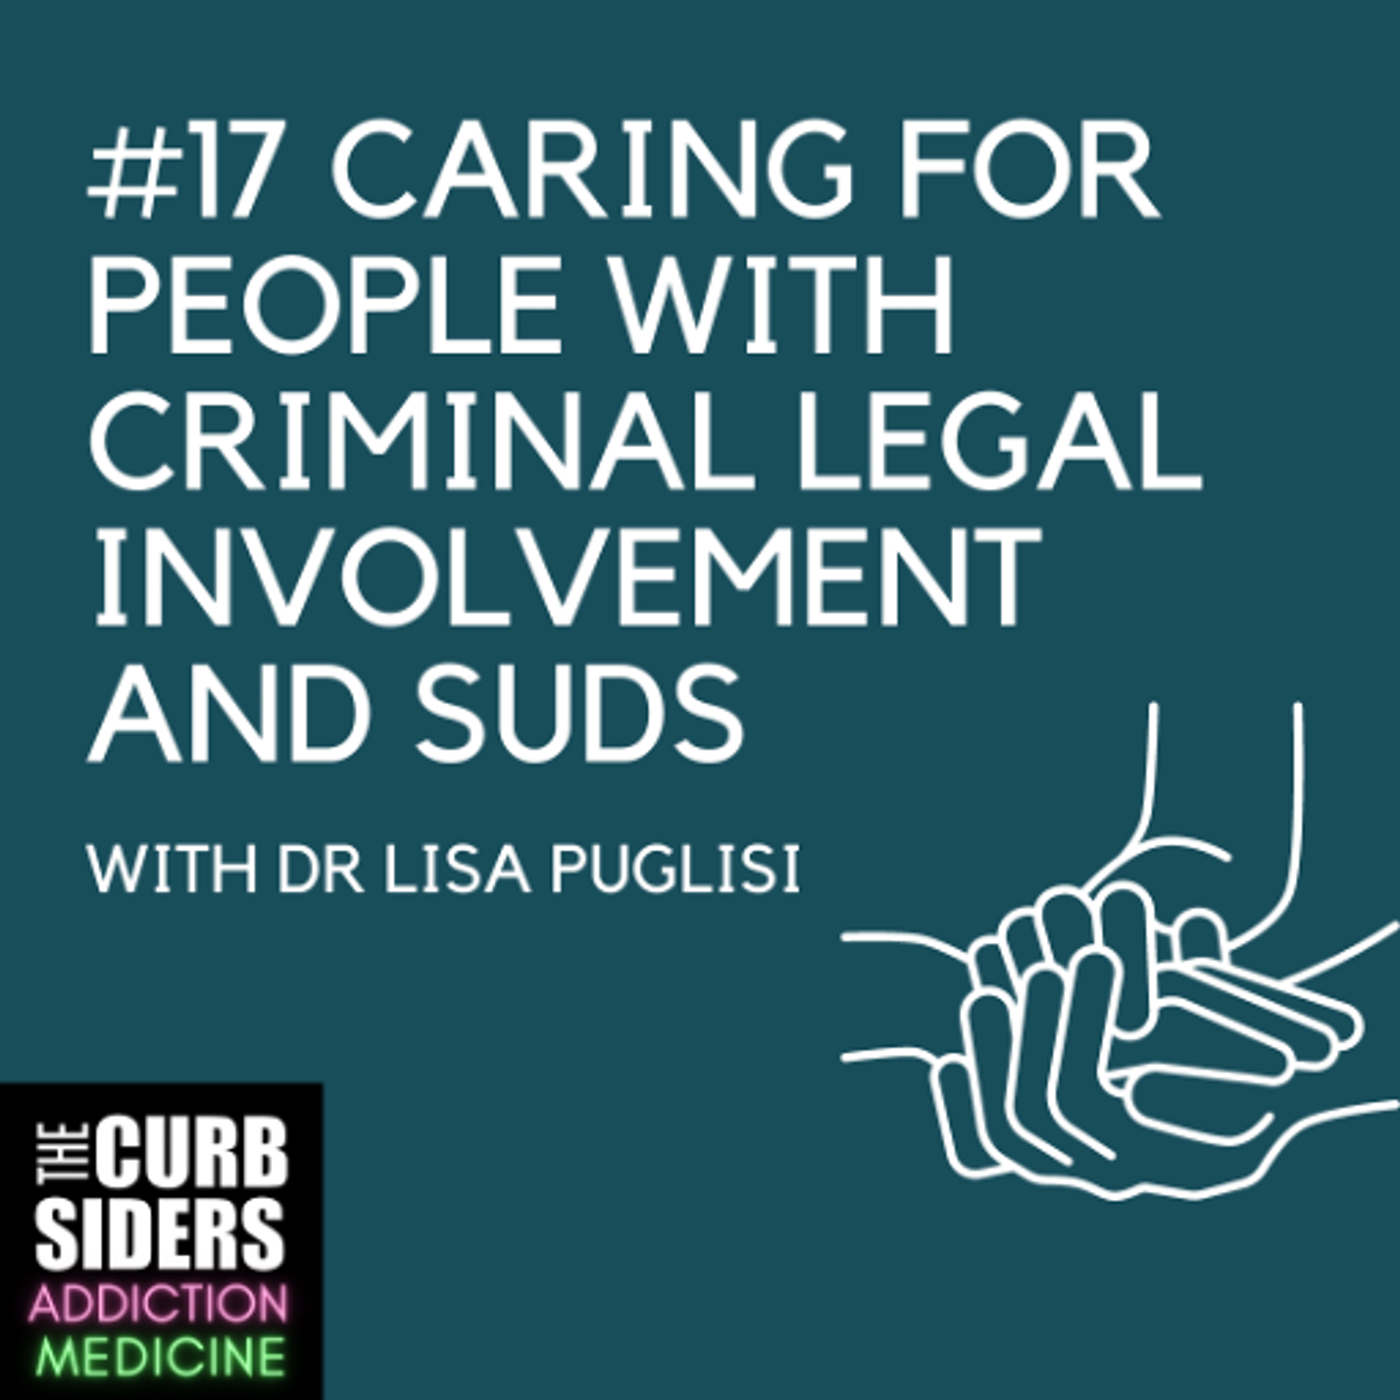 S2 Ep6: #17 Caring for People with Criminal Legal Involvement and SUDs with Dr. Lisa Puglisi